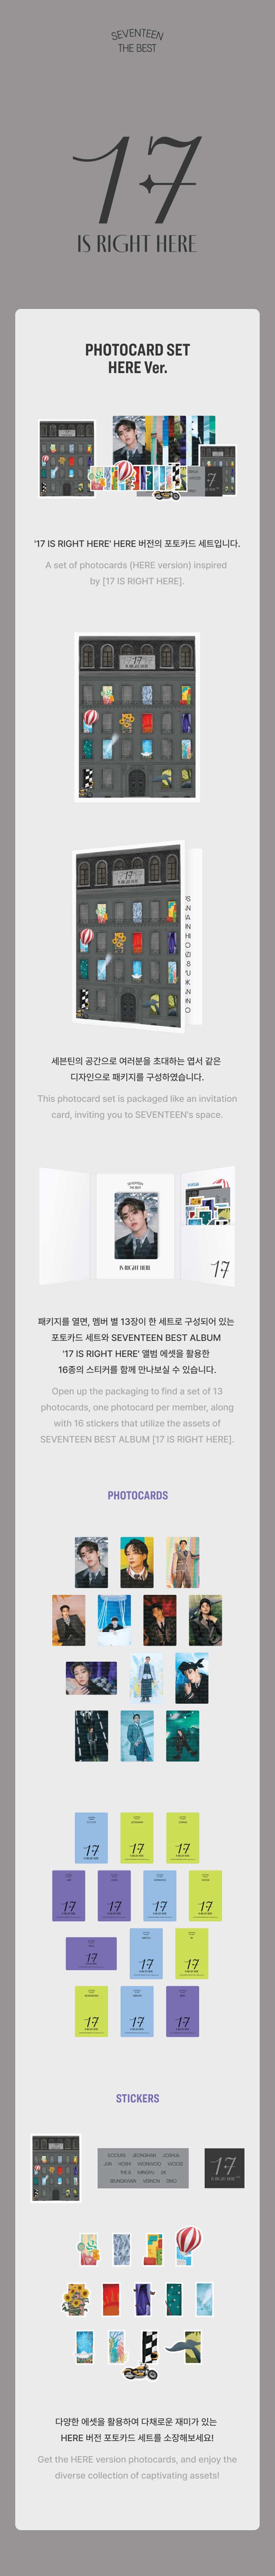 seventeen-the-best-17-is-right-here-photocard-set-here-ver-wholesales